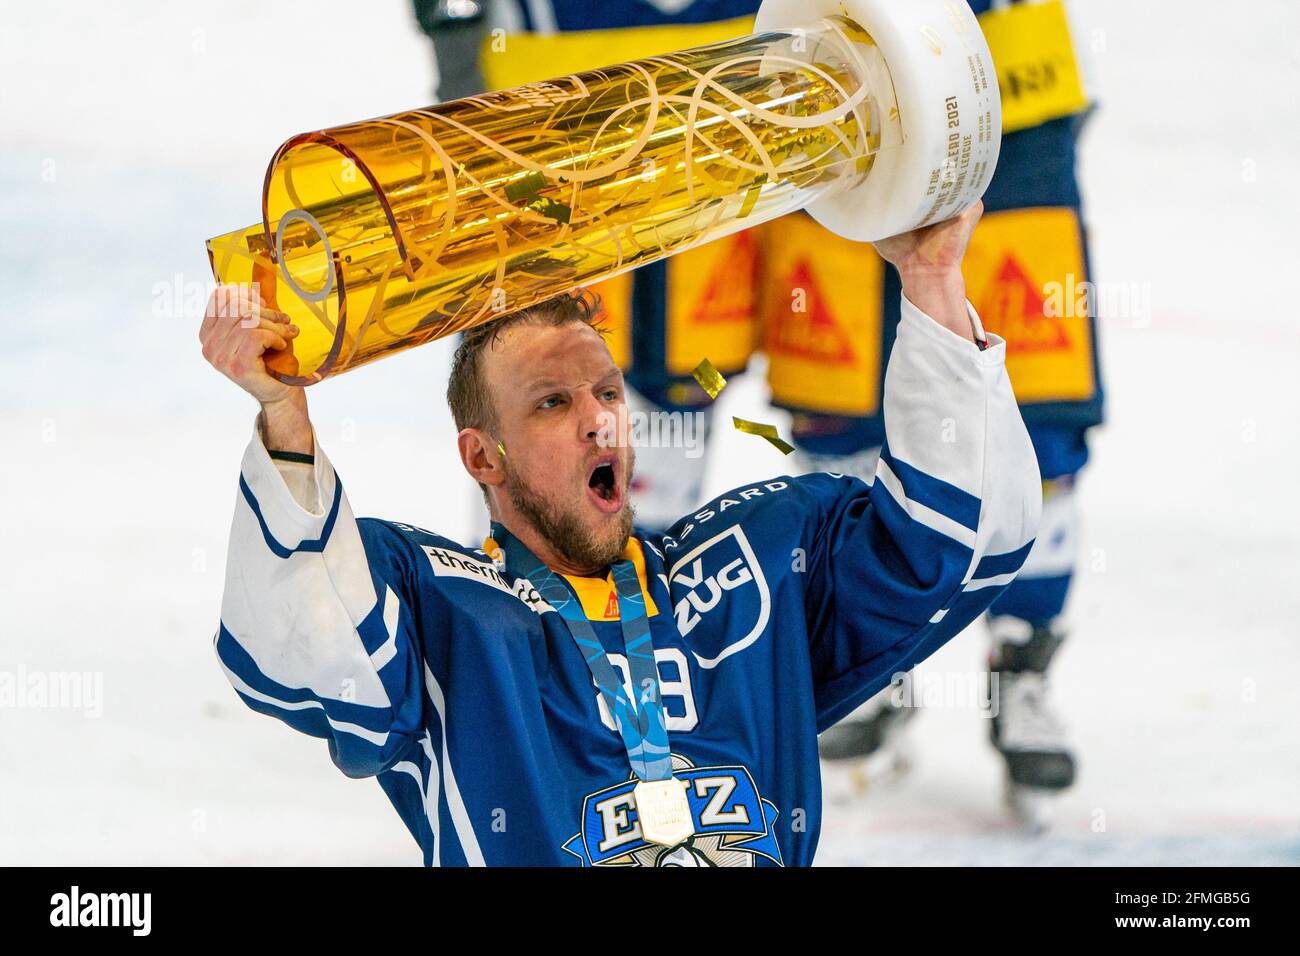 Justin Abdelkader # 89 (EV Zug) with the trophy during the National League Playoff Final ice hockey game 3 between EV Zug and Geneve-Servette HC on May 7th, 2021 in the Bossard